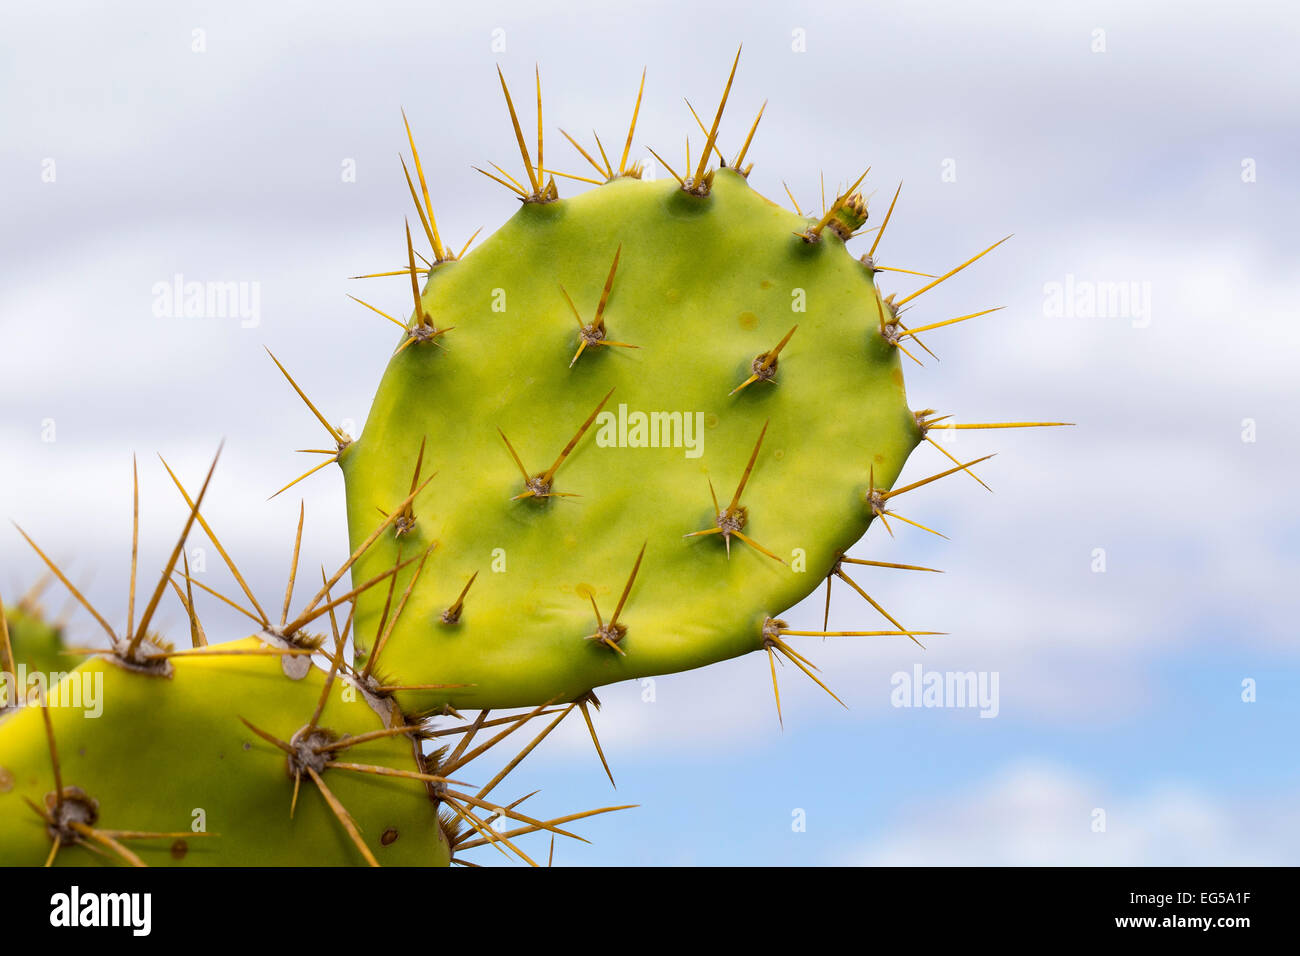 Leaf with spines, Prickly Pear Cactus (Opuntia), Gran Canaria, Canary Islands, Spain Stock Photo